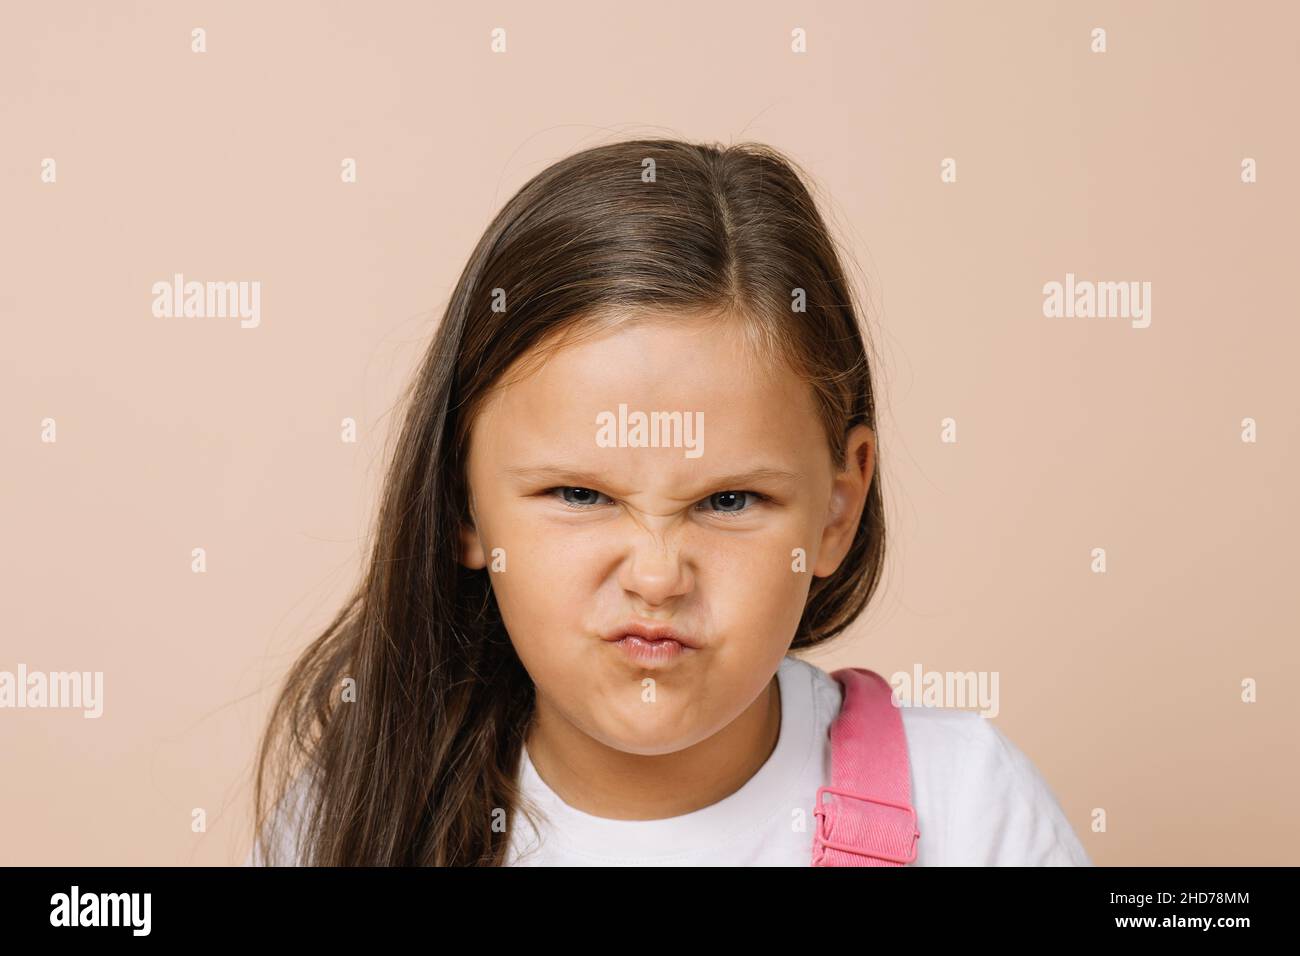 Portrait child with dissatisfied grimacing face and displeased angry eyes looking at camera wearing bright pink jumpsuit and white t-shirt on beige Stock Photo